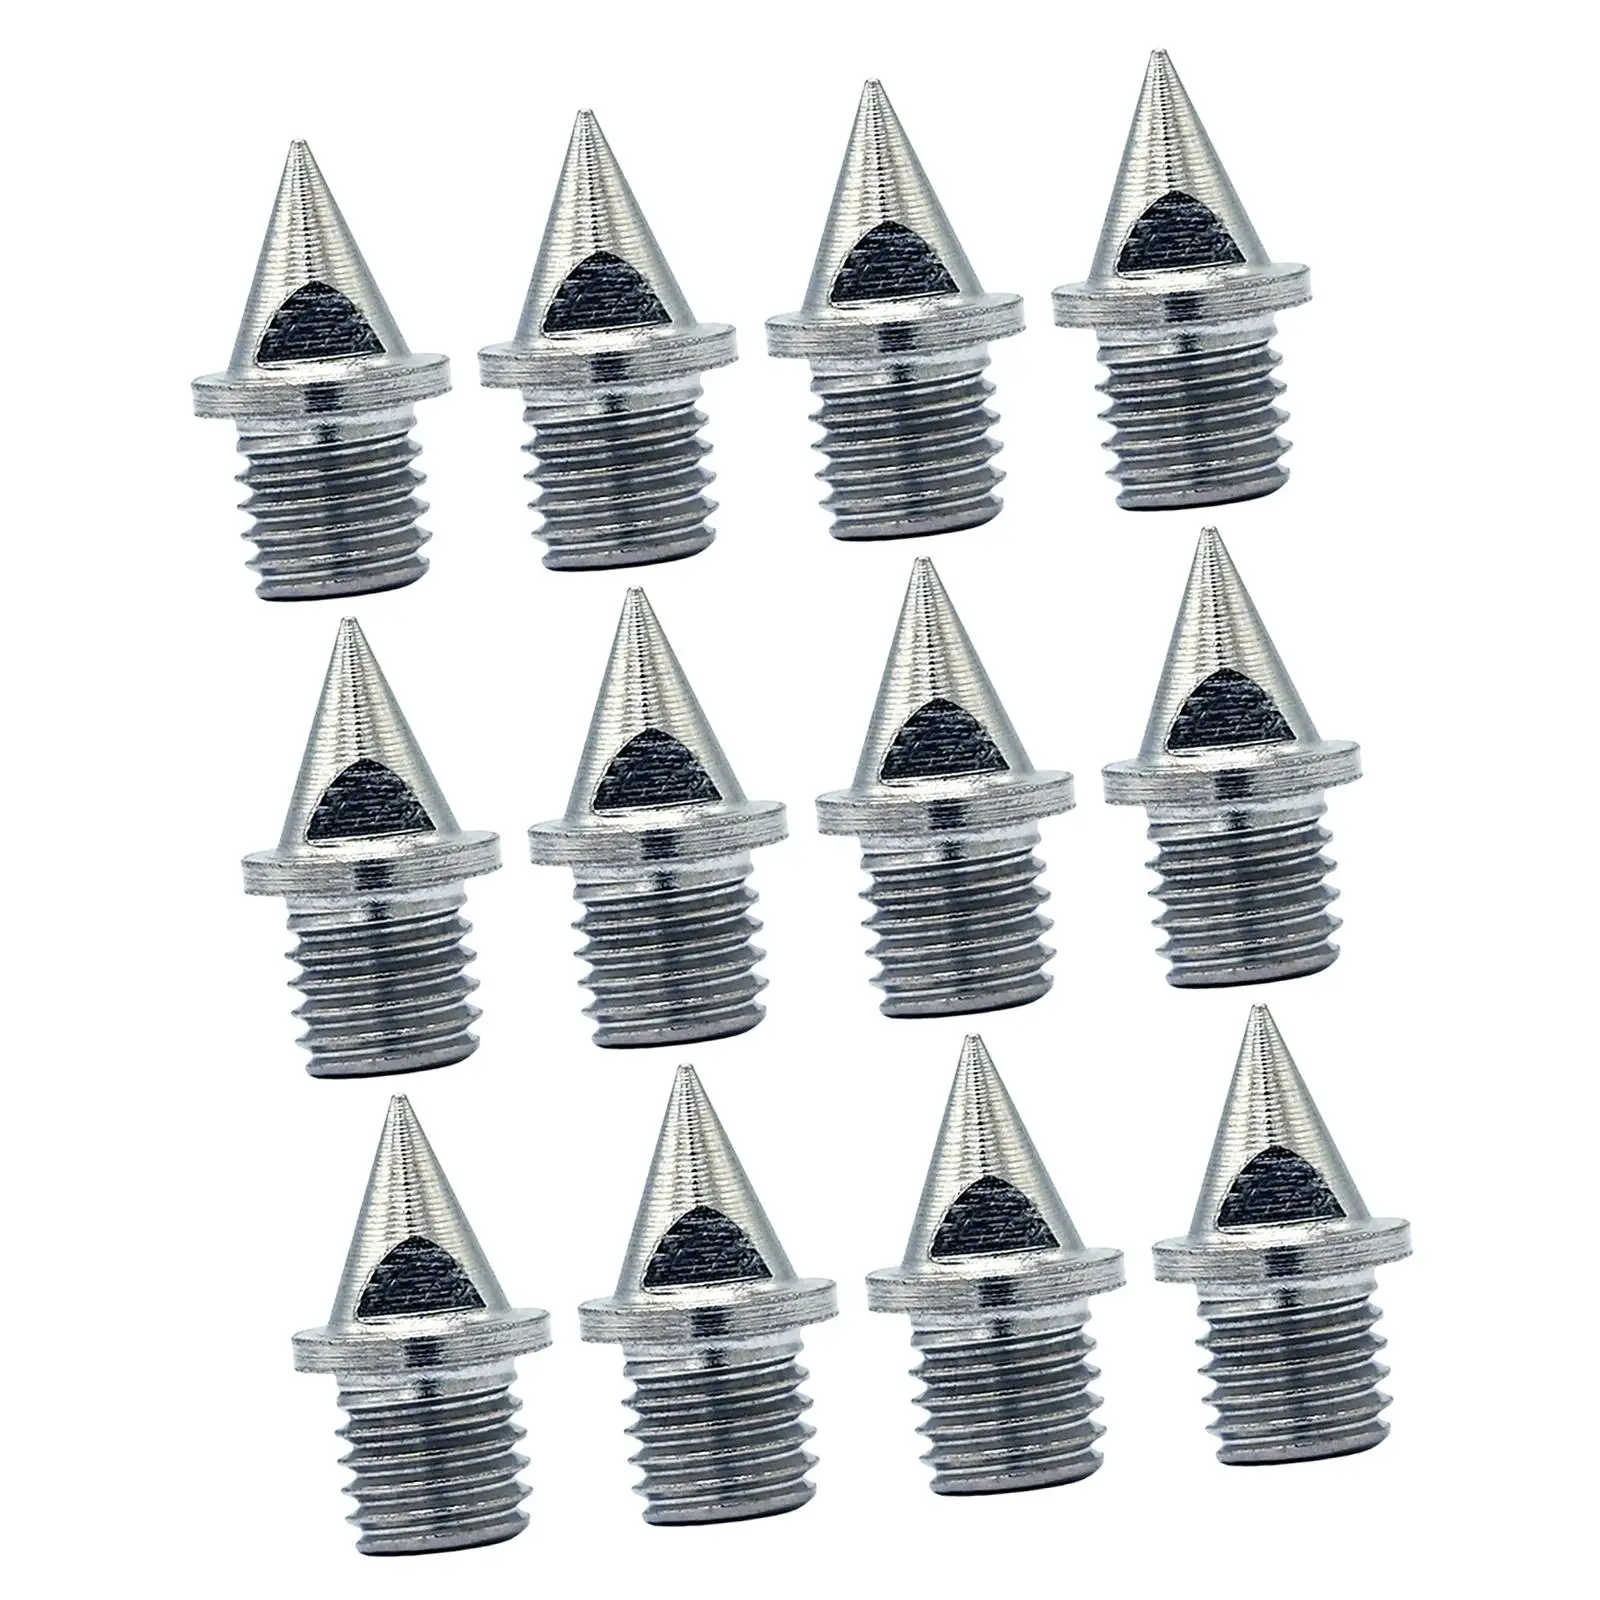 12x Steel Track Spikes Replacement Spikes for Track Shoes Cross Country Spikes for Track Long Jumping Hiking Short Running Shoes